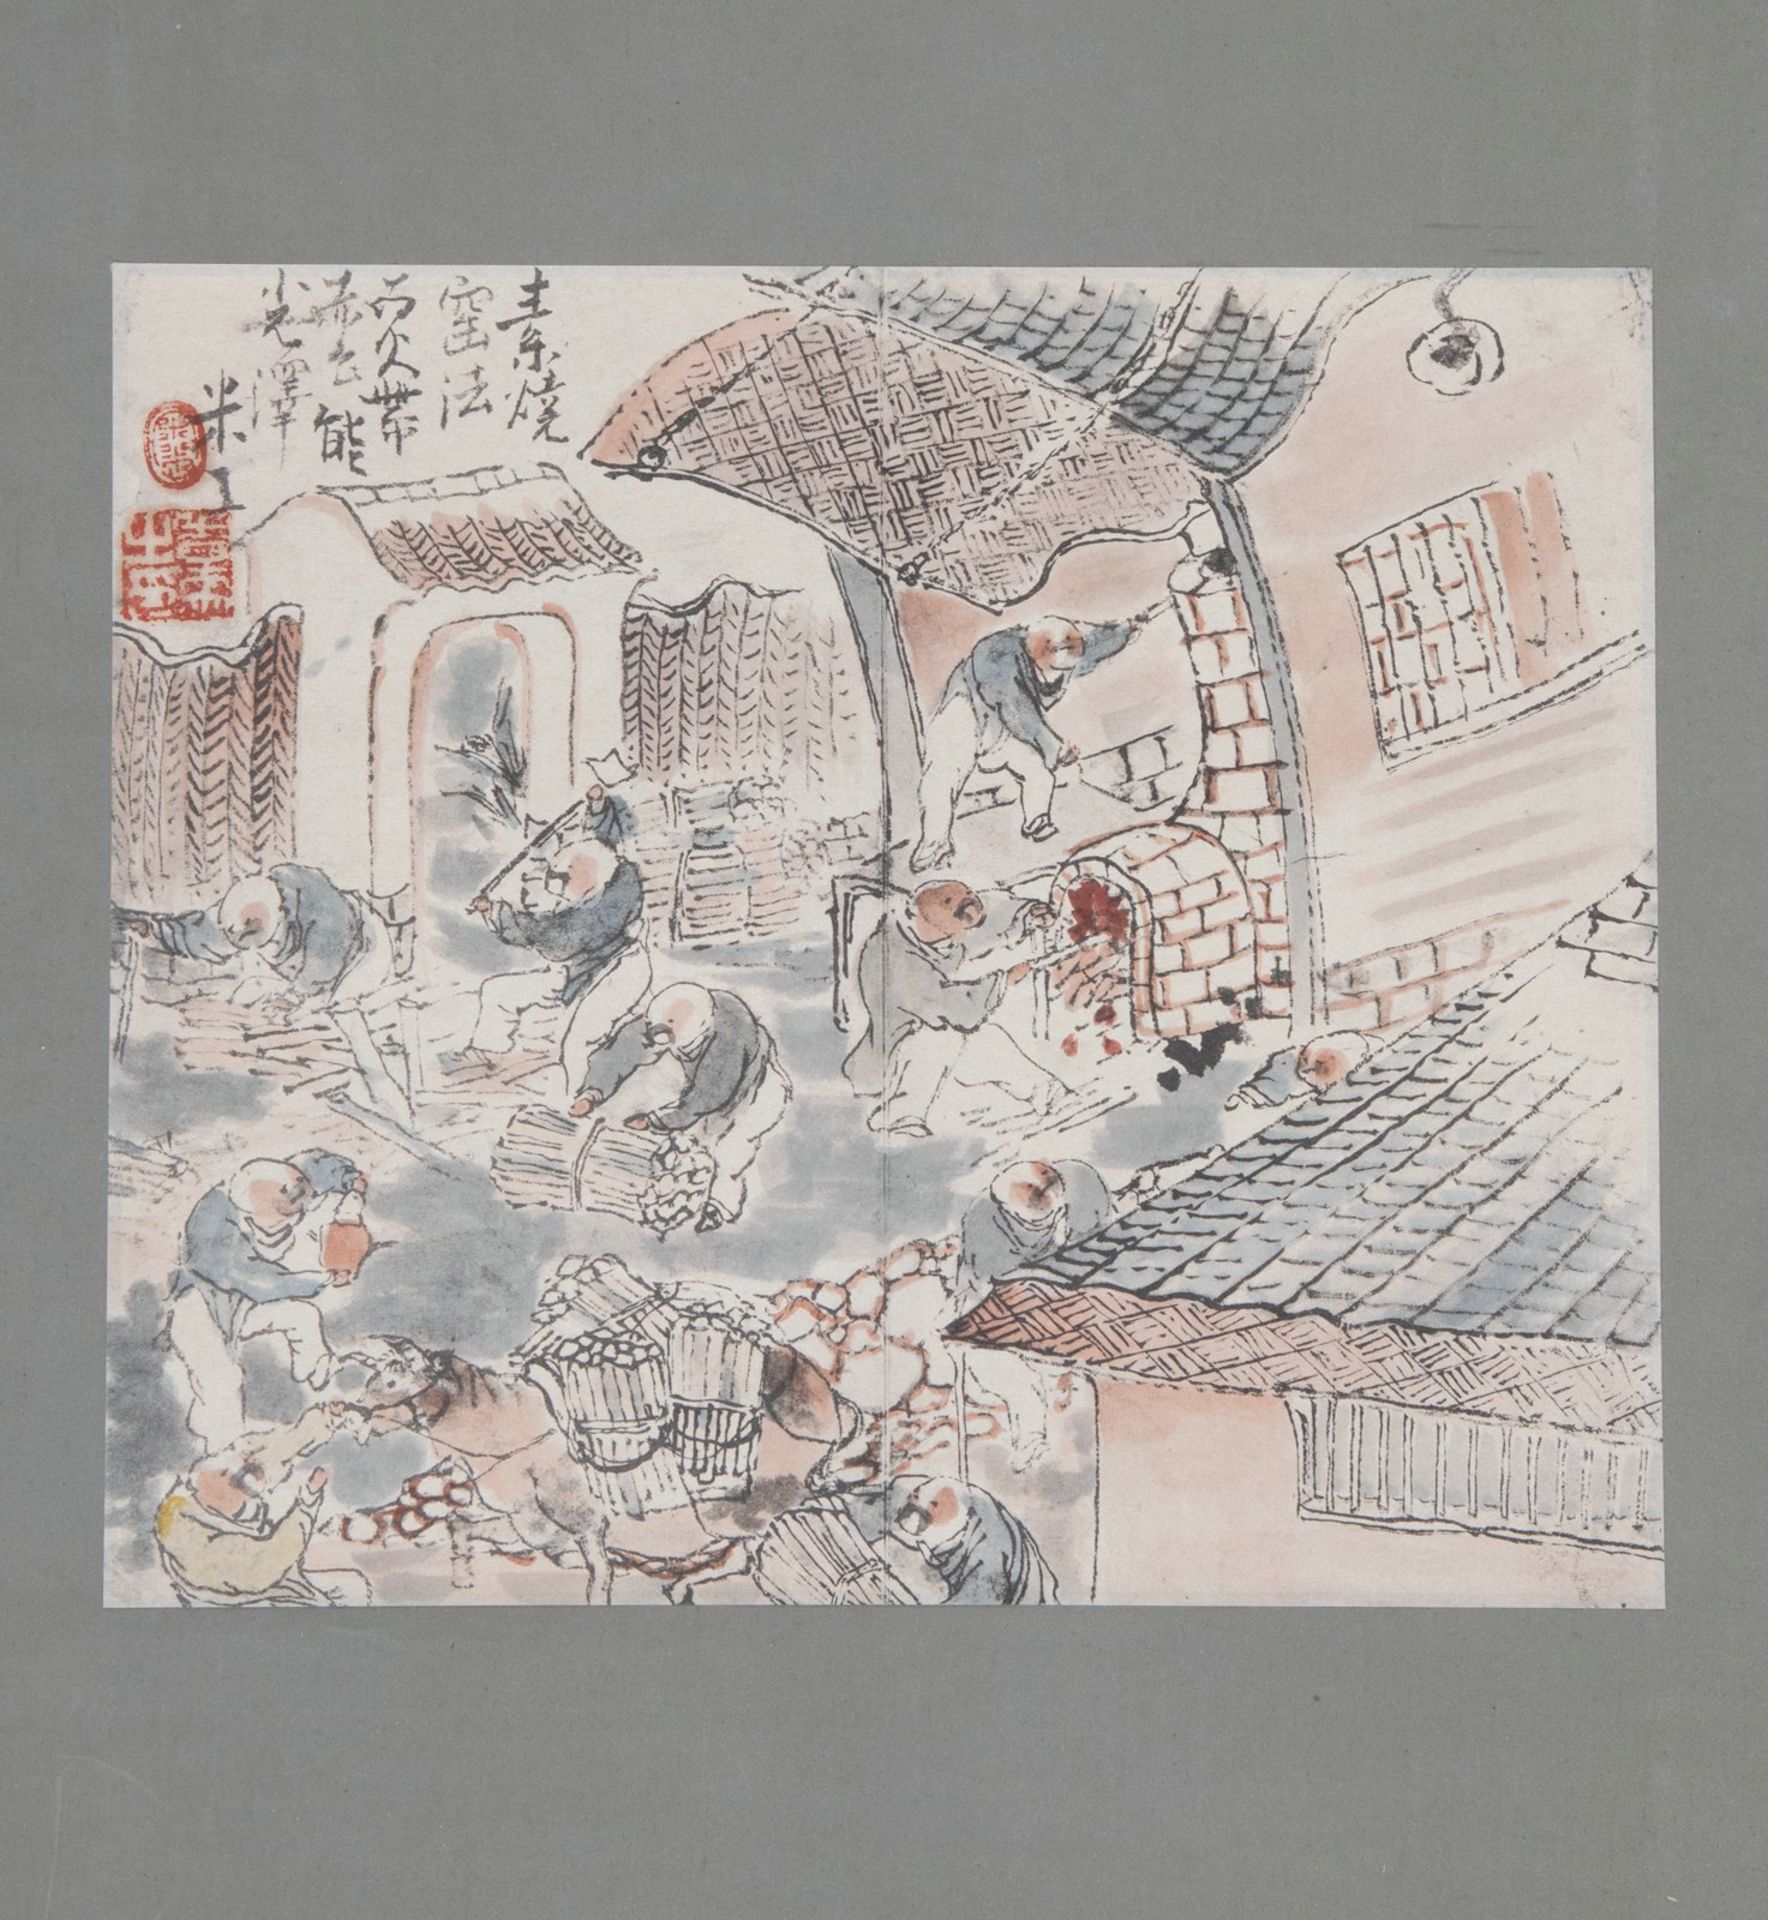 A CALLIGRAPHY AND TWO PRINTS DEPICTING A GUARDIAN FIGURE AND A VILLAGE SCENE - Image 4 of 5